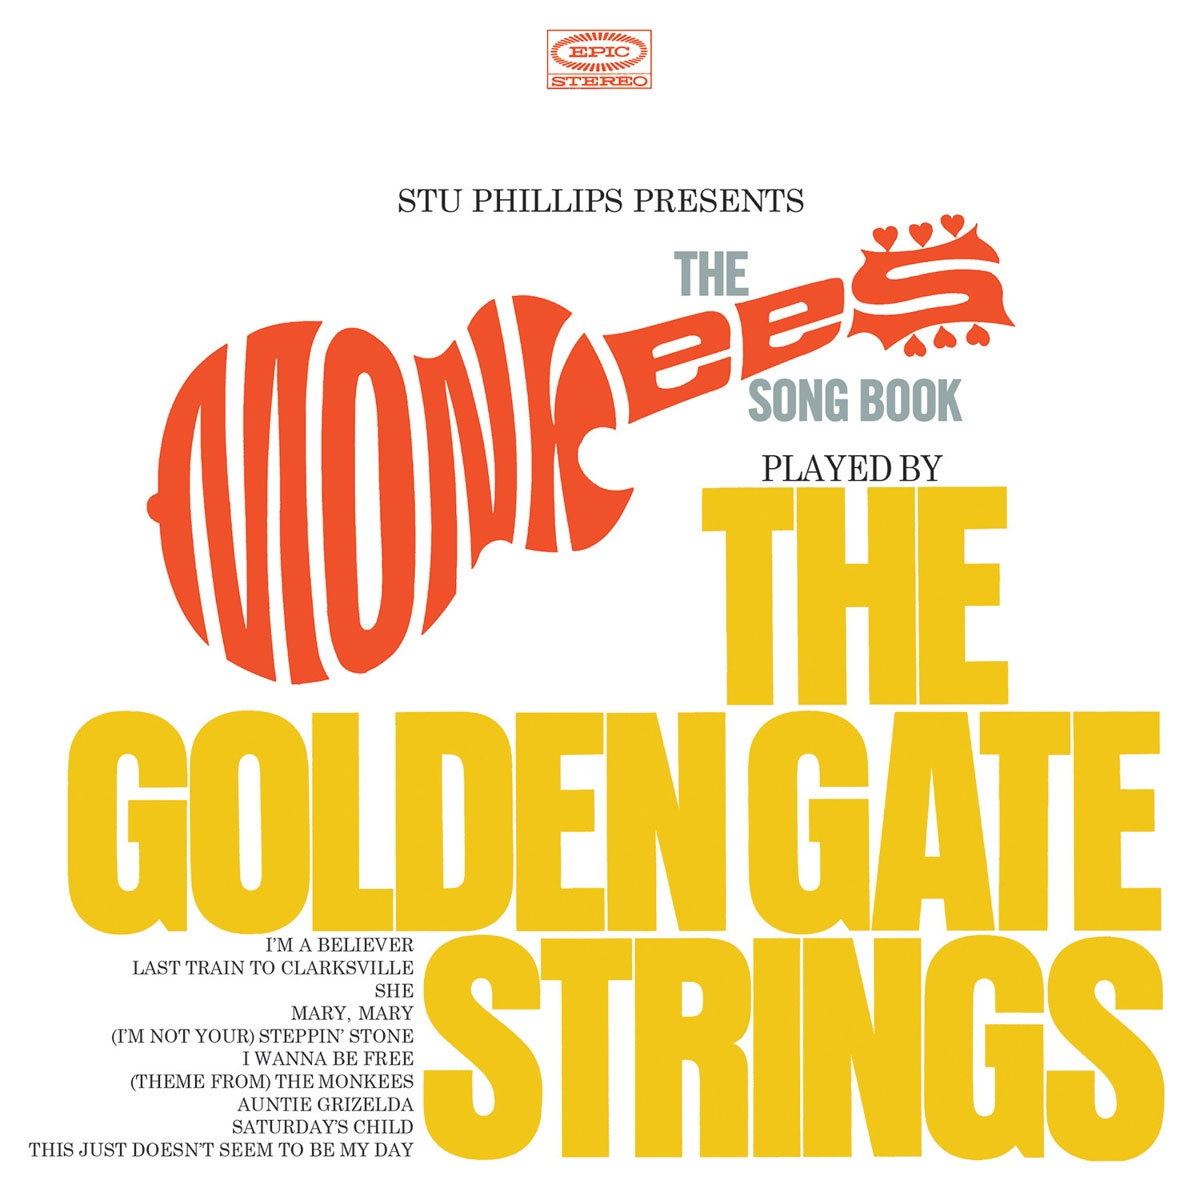 The Monkees Songbook